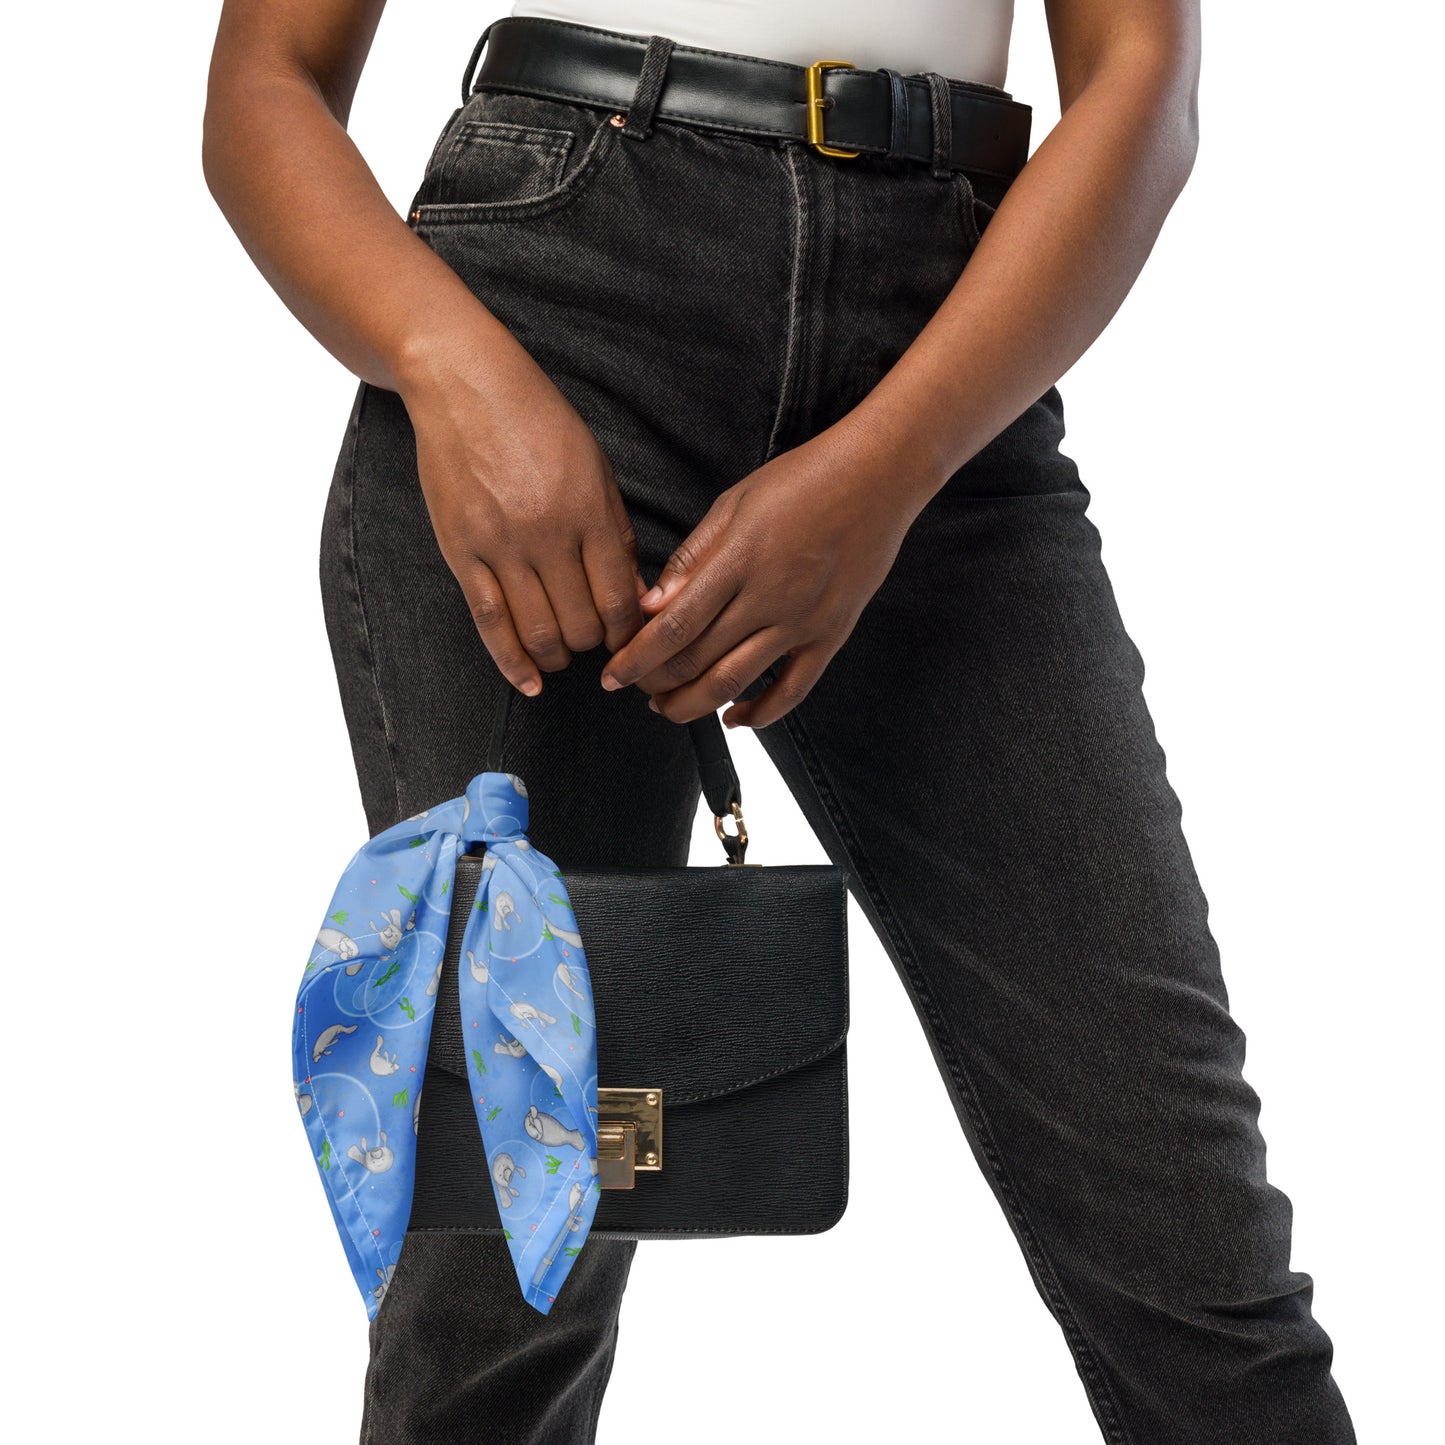 Manatee bandana. Shown as a ribbon accent on a purse. Features patterned design of hand-illustrated manatees, seaweed, seashells, and bubbles on a blue  background.